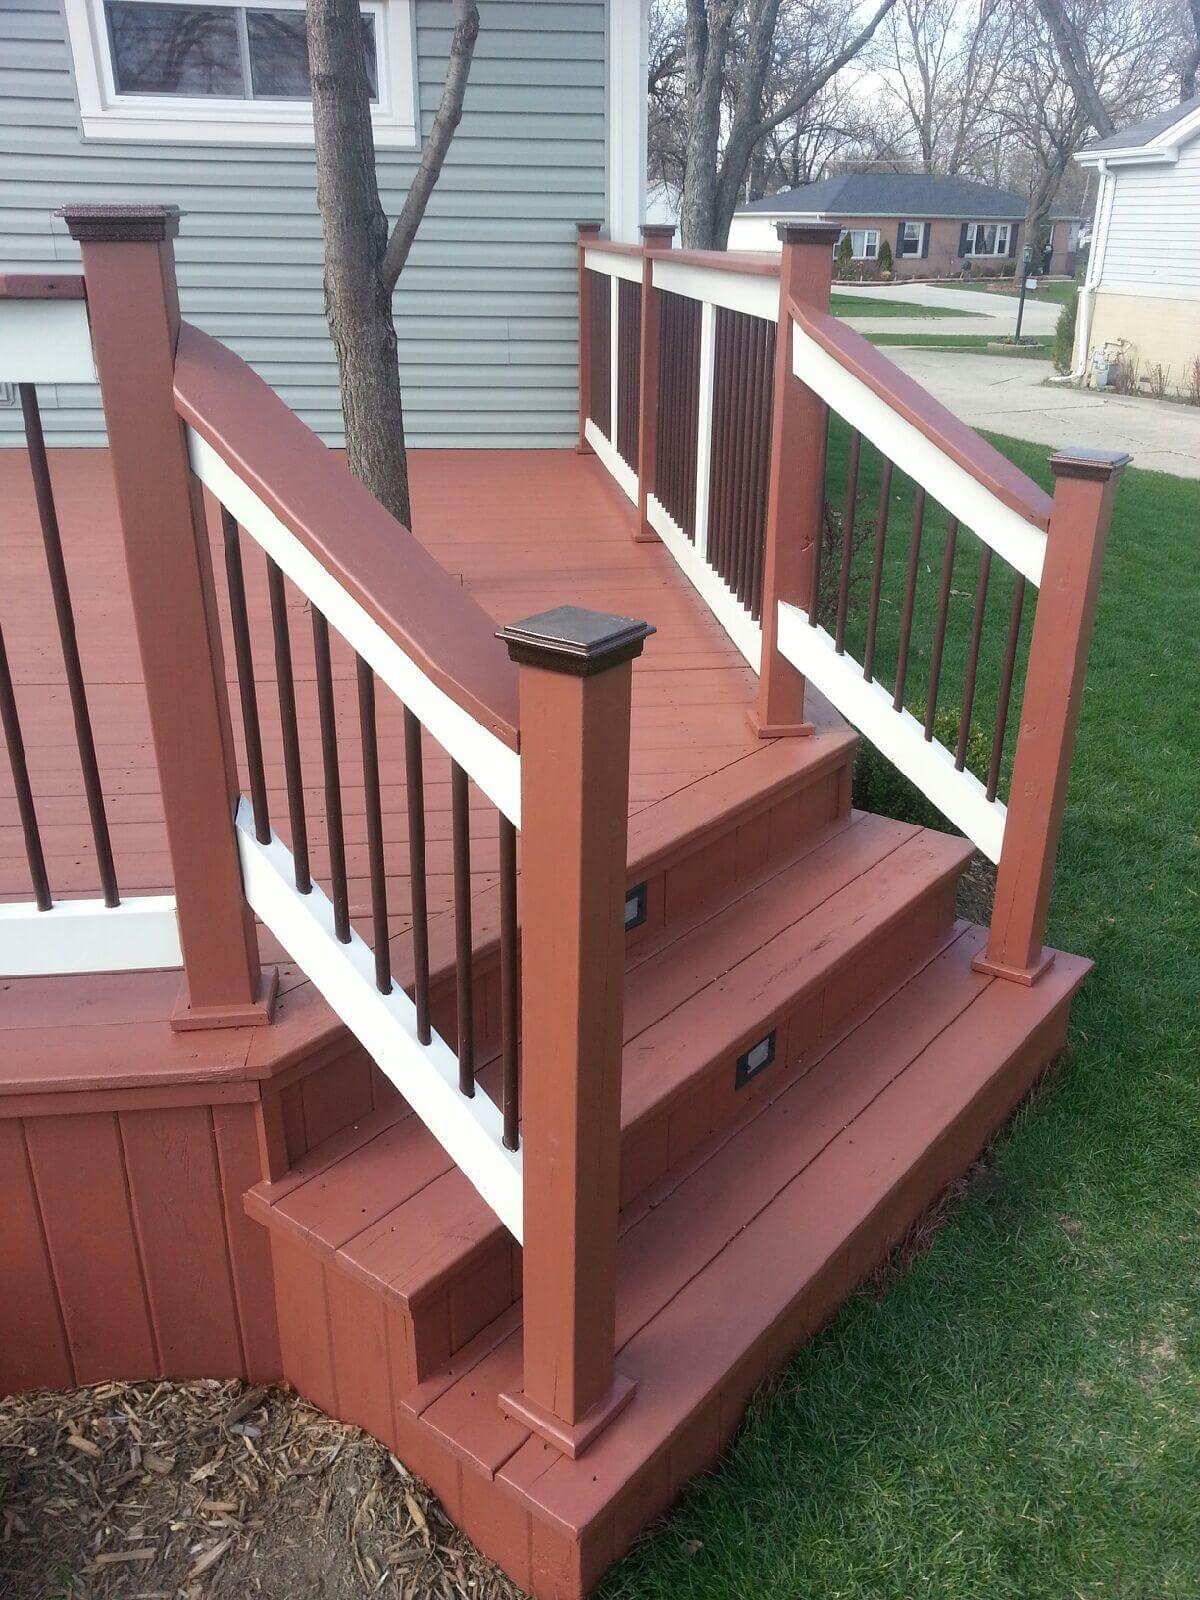 Repairs and maintenance for your deck, fence, and exterior wood staining. - Deck Staining North Aurora - Deck Cleaning Services